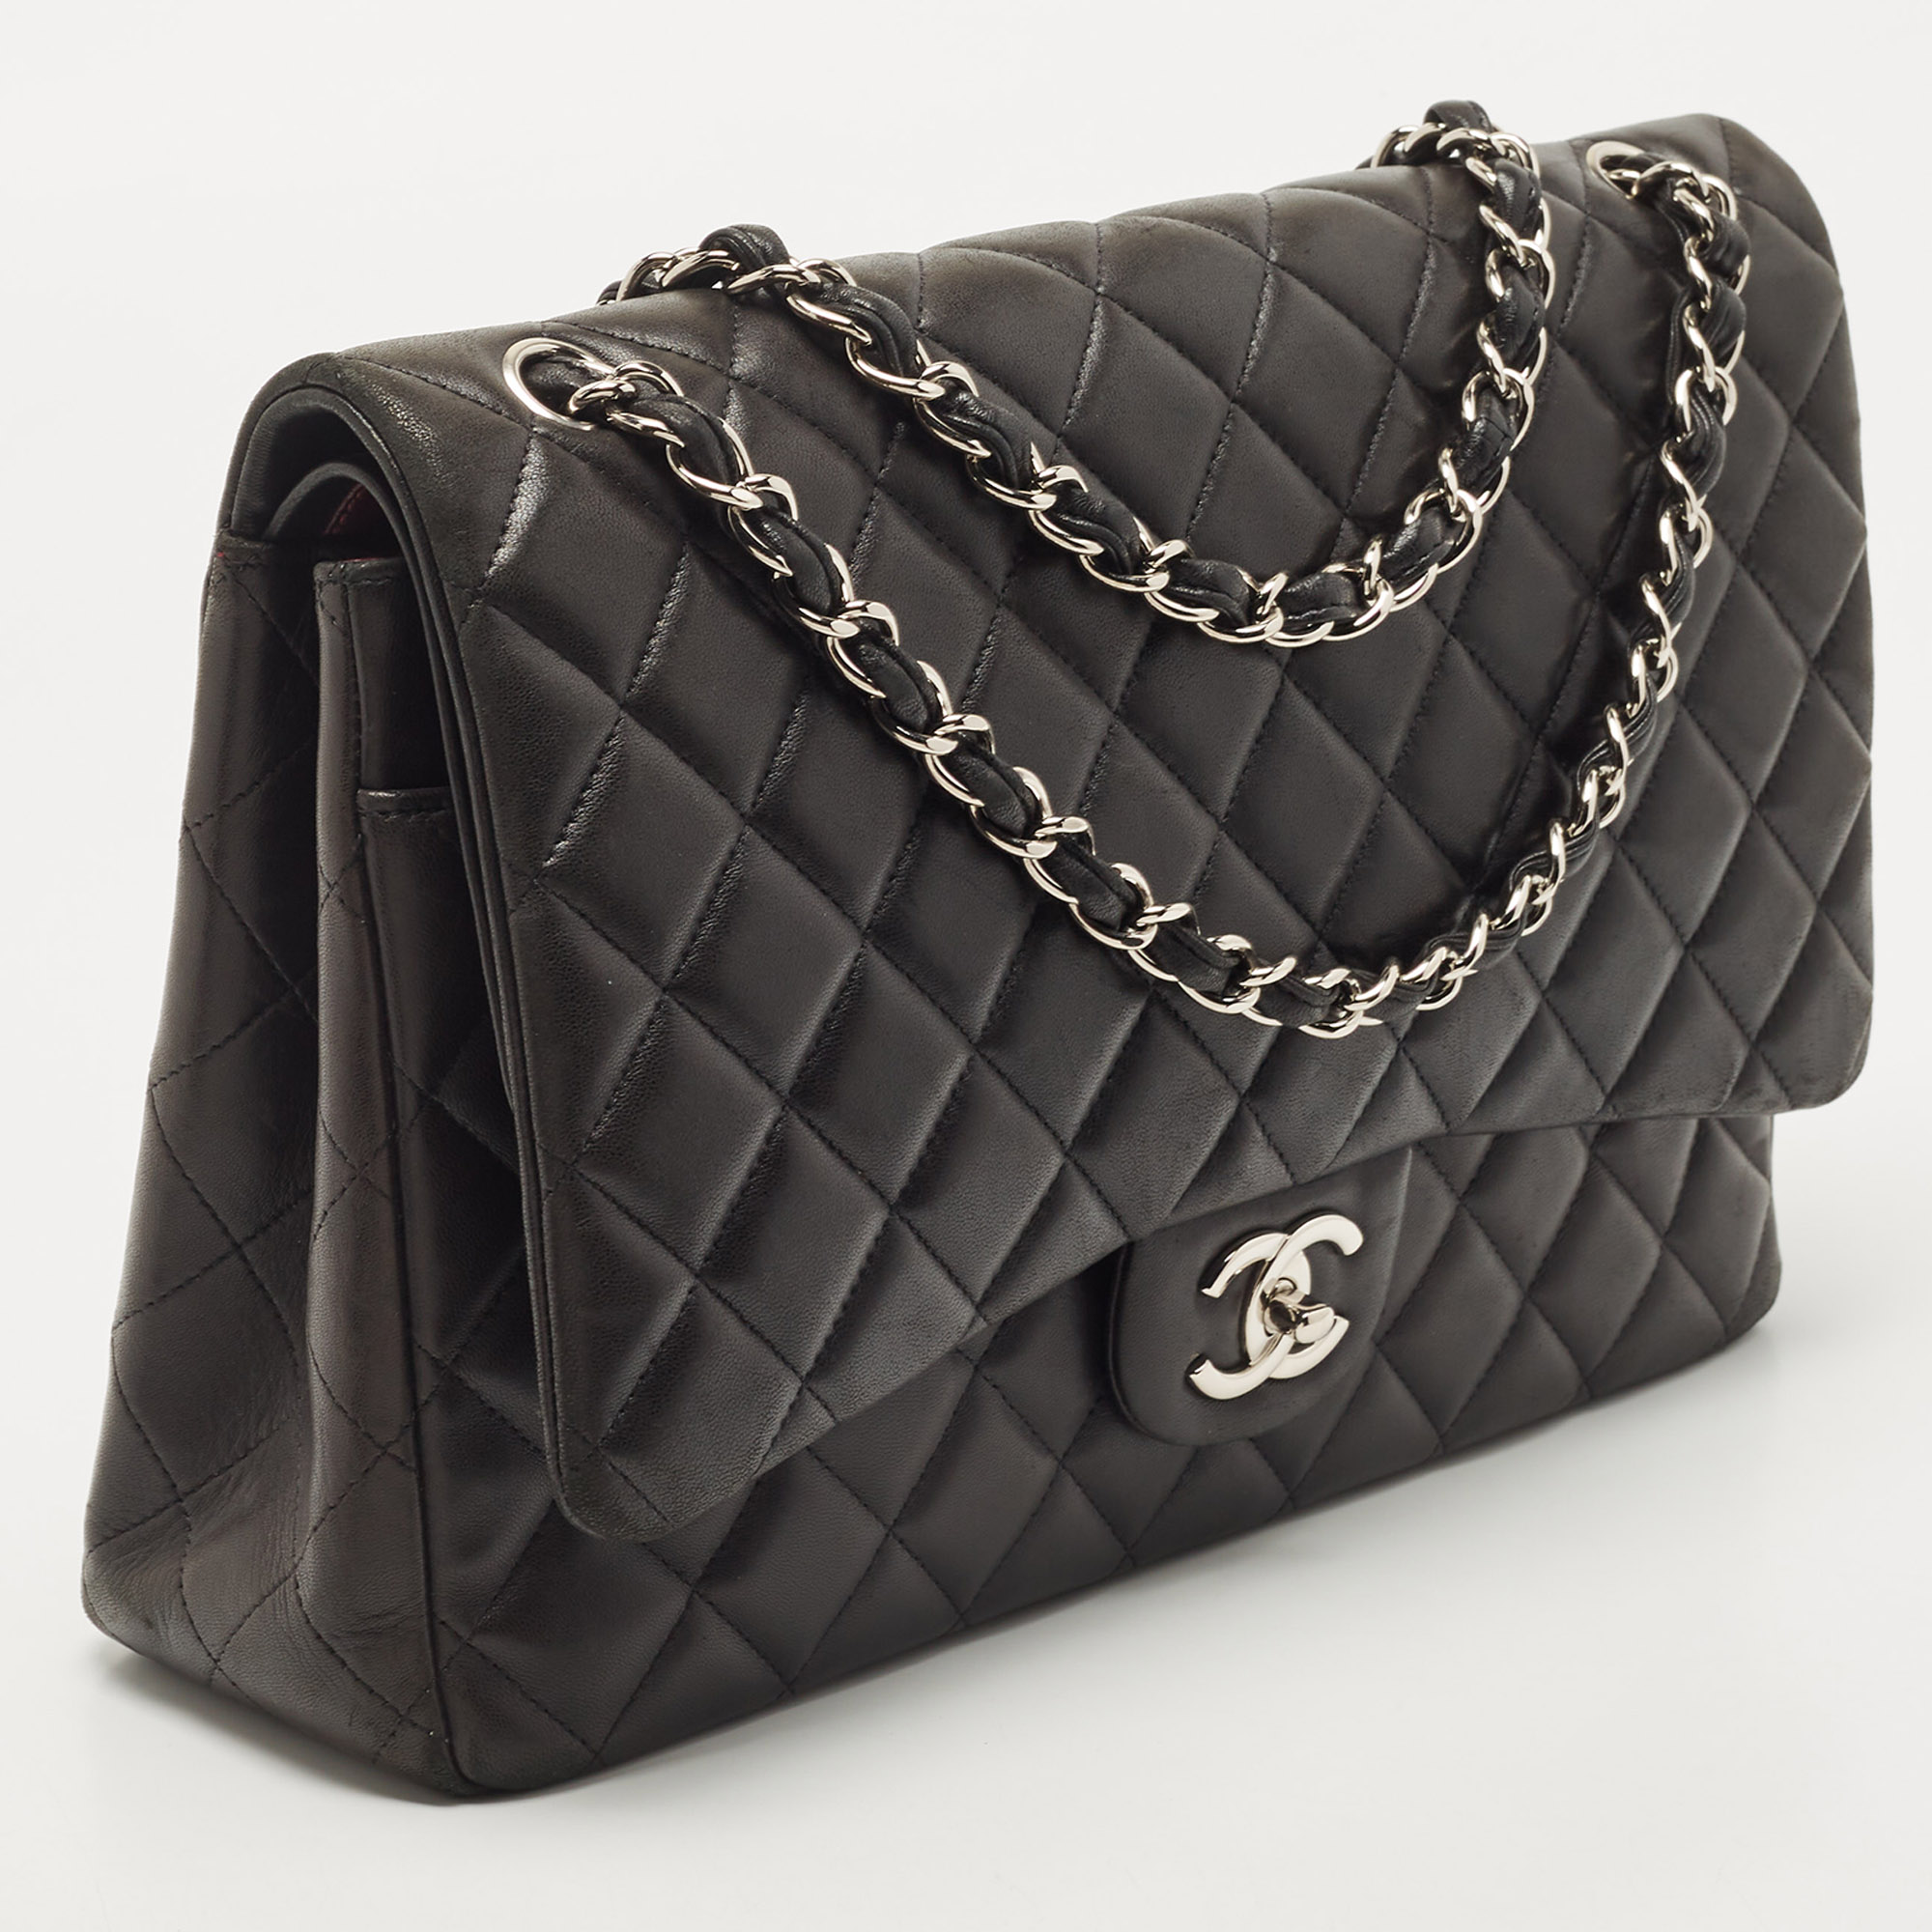 Chanel Black Quilted Lambskin Leather Maxi Classic Double Flap Bag